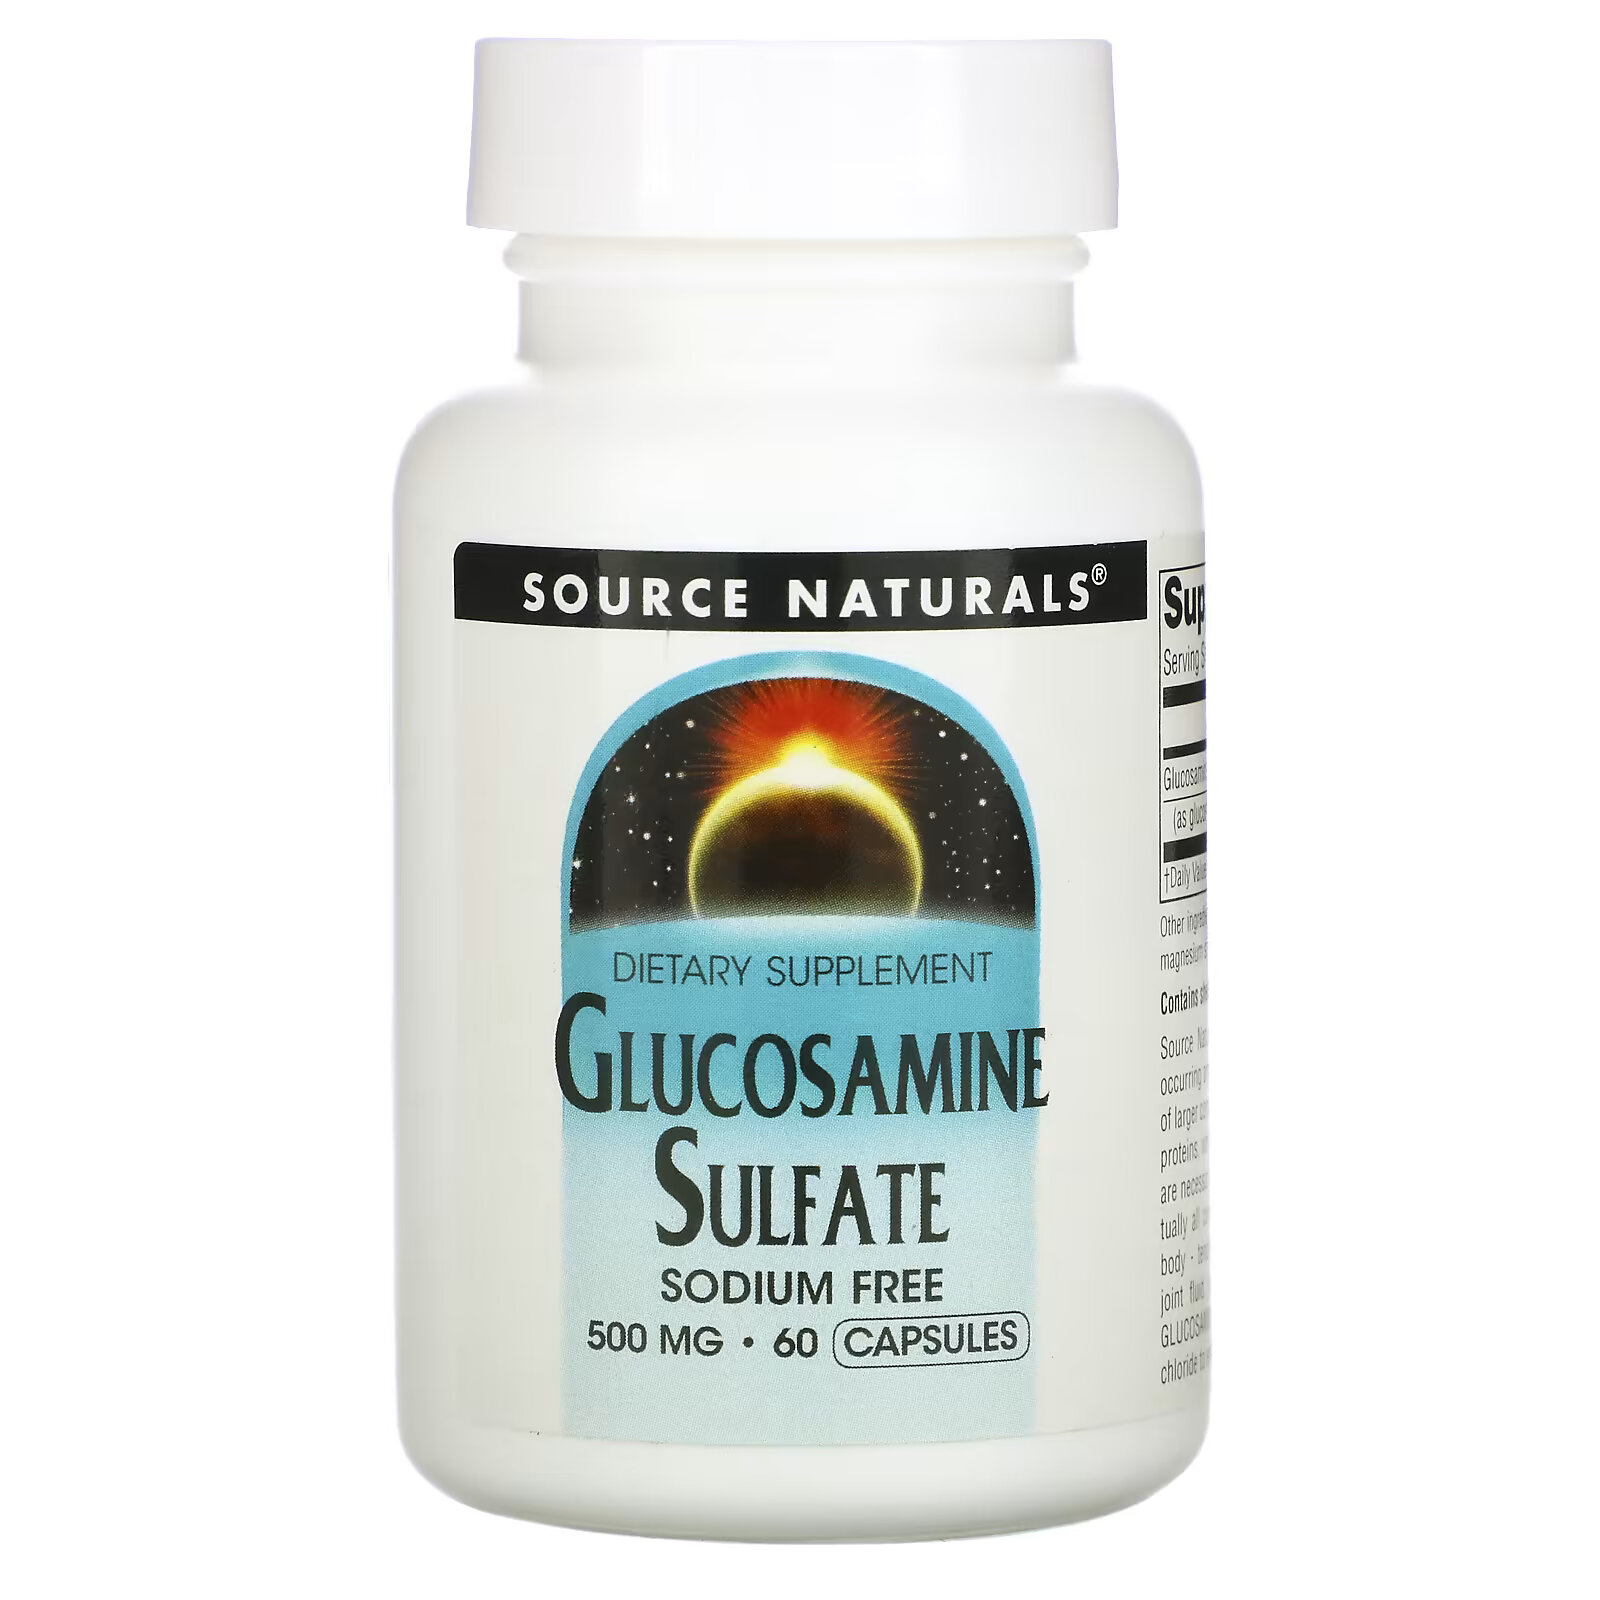 Source Naturals, Сульфат глюкозамина, 500 мг, 60 капсул source naturals d манноза 500 мг 60 капсул